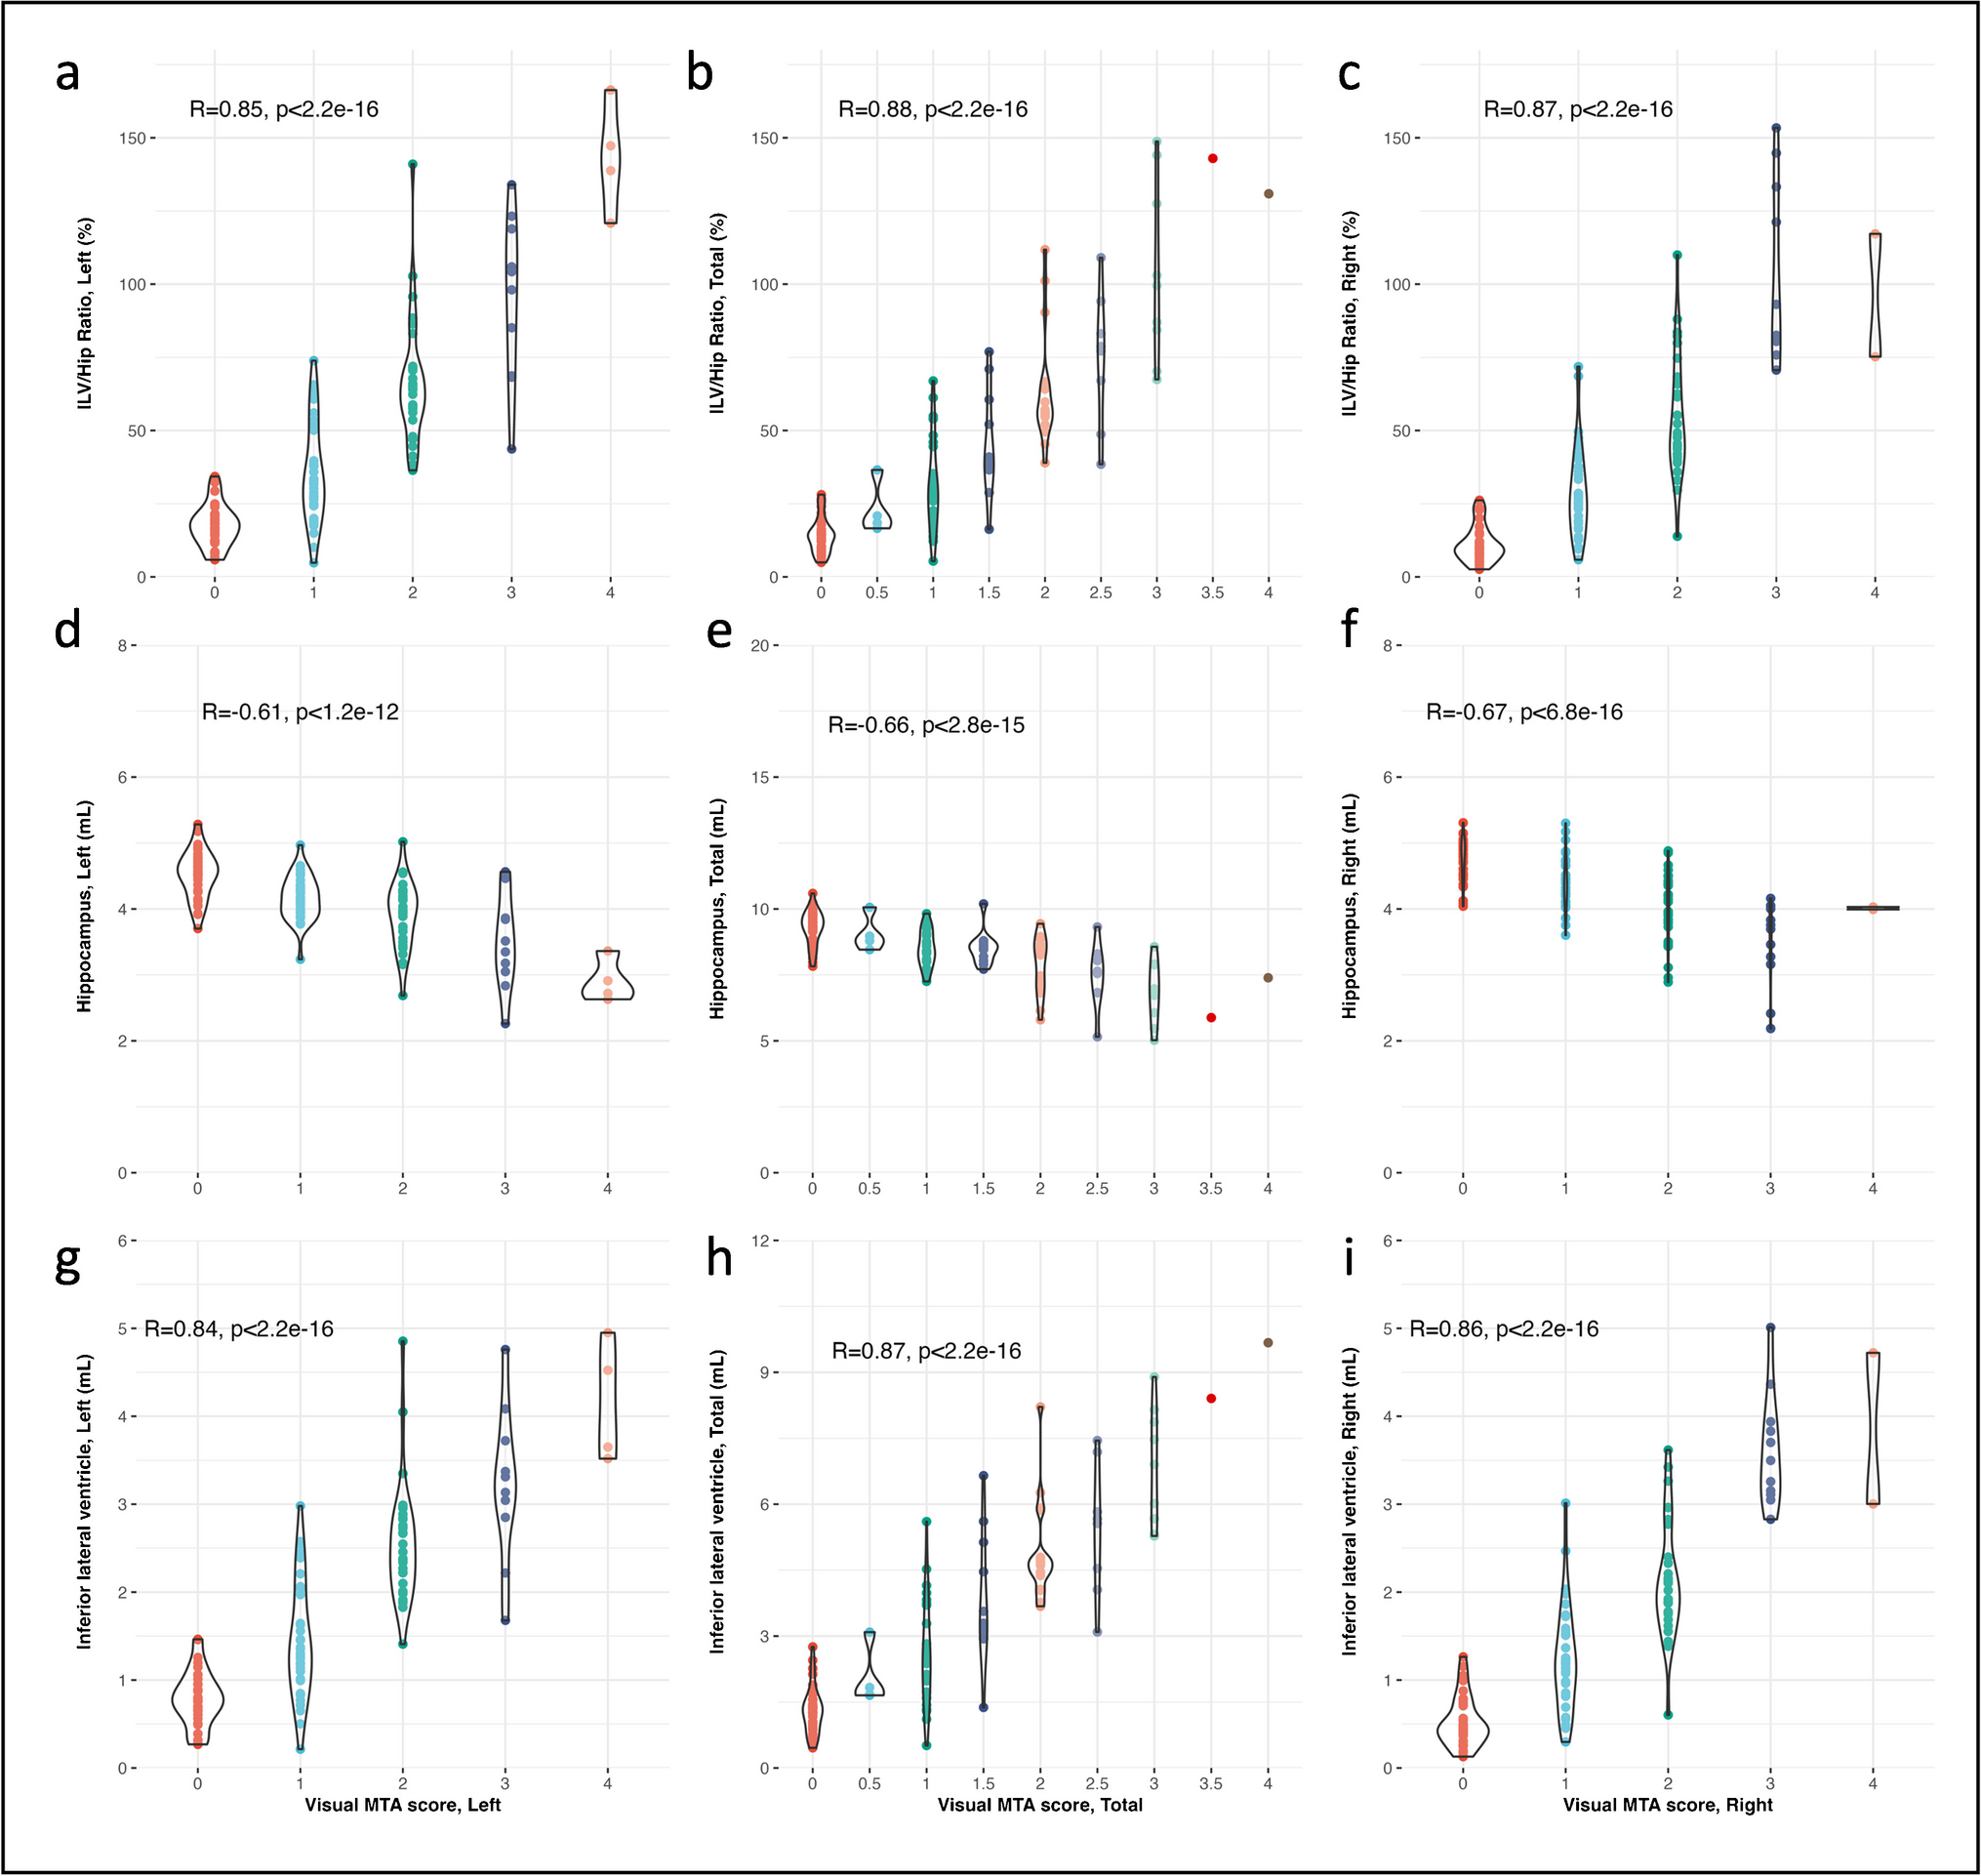 Towards validation in clinical routine: a comparative analysis of visual MTA ratings versus the automated ratio between inferior lateral ventricle and hippocampal volumes in Alzheimer’s disease diagnosis